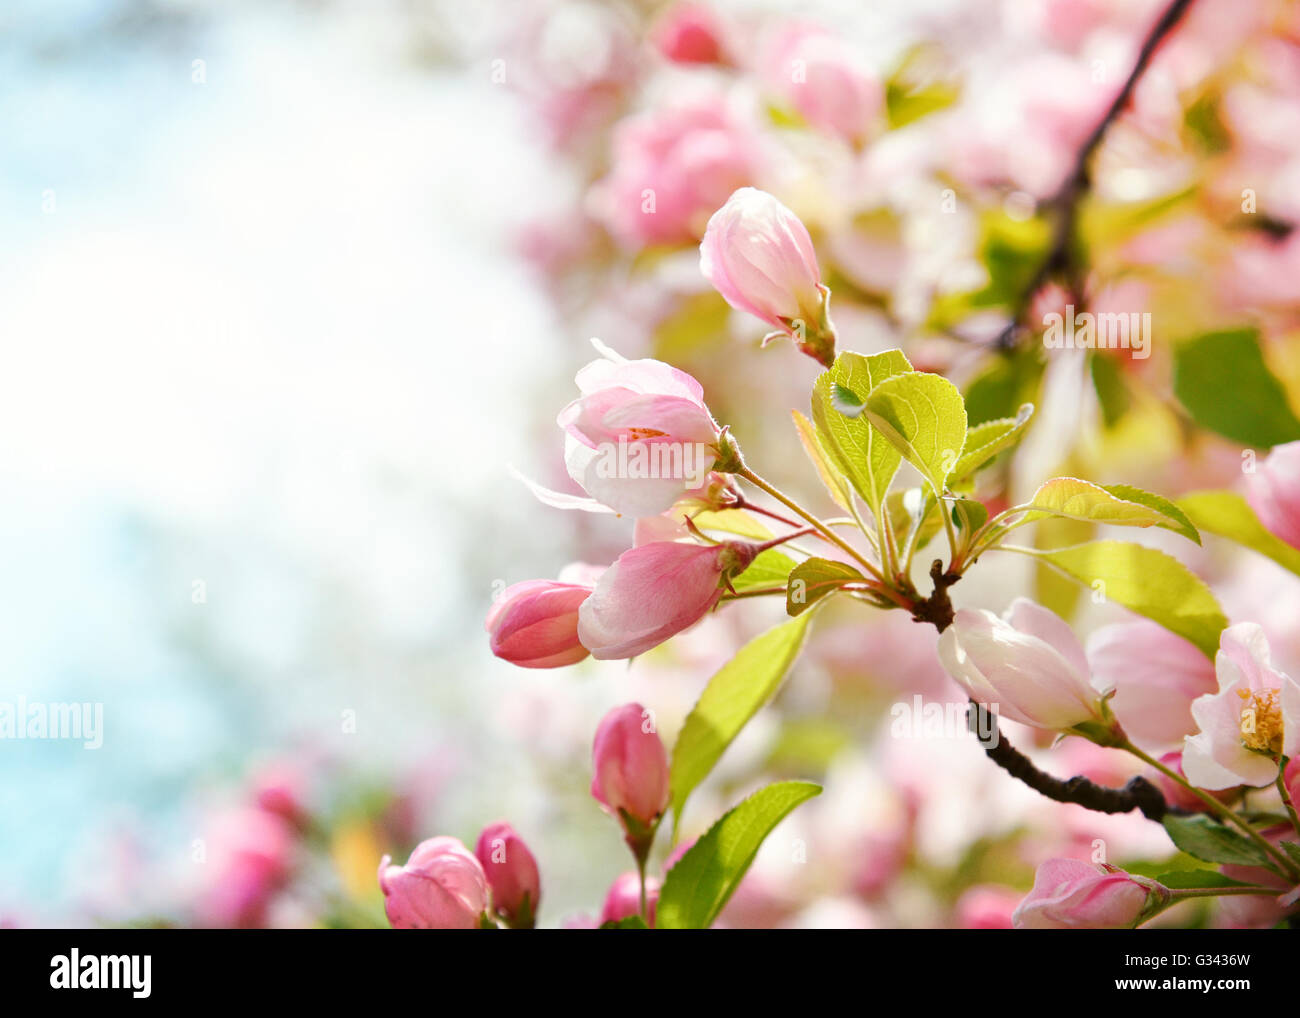 A closeup of beautiful pink cherry blossom flowers in a tree with a blurrred background area. Stock Photo